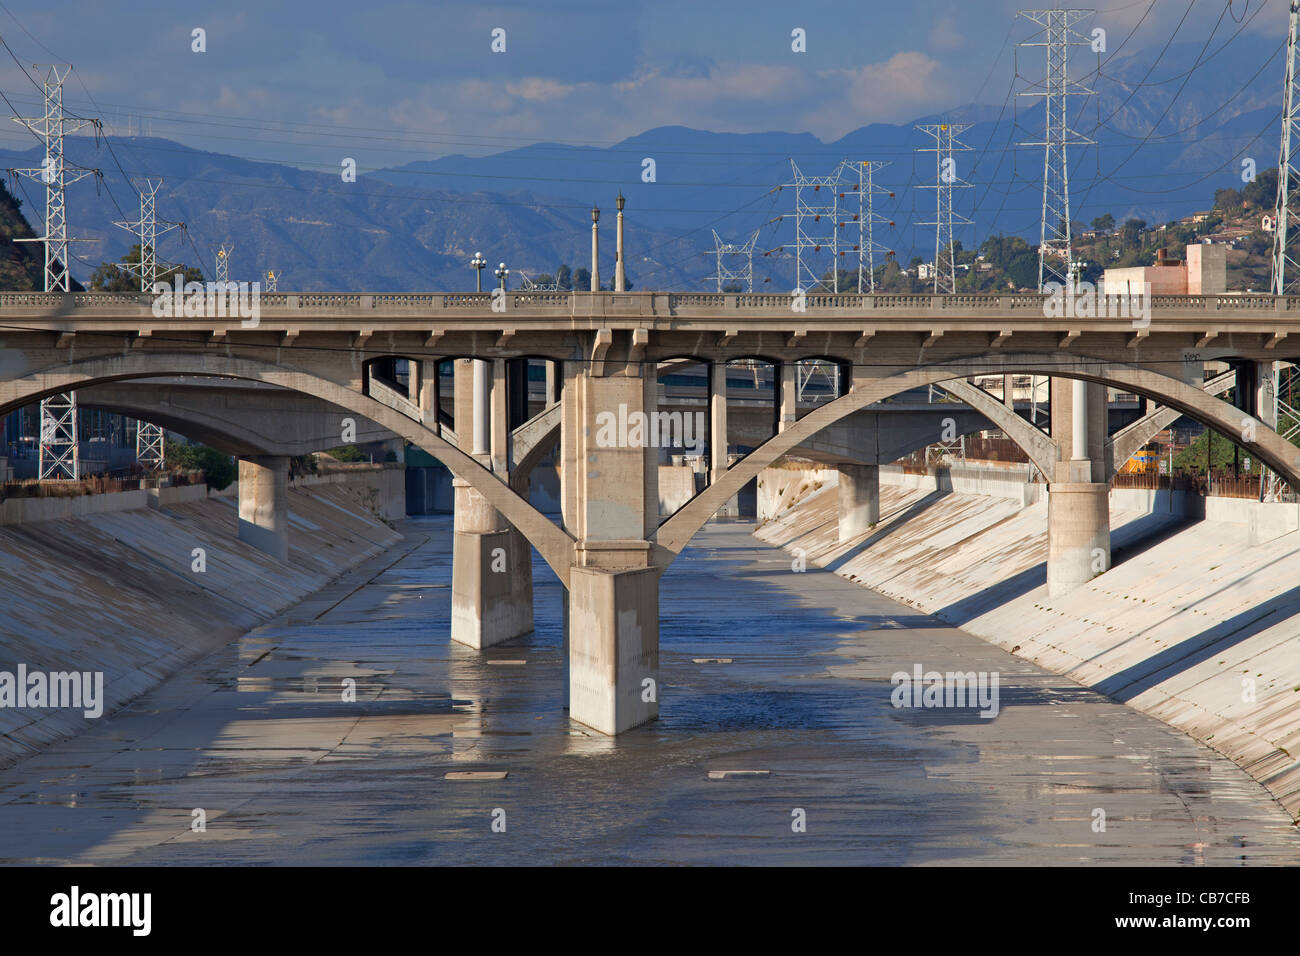 Spring Street Bridge over the Los Angeles River, Downtown Los Angeles, California, USA Stock Photo